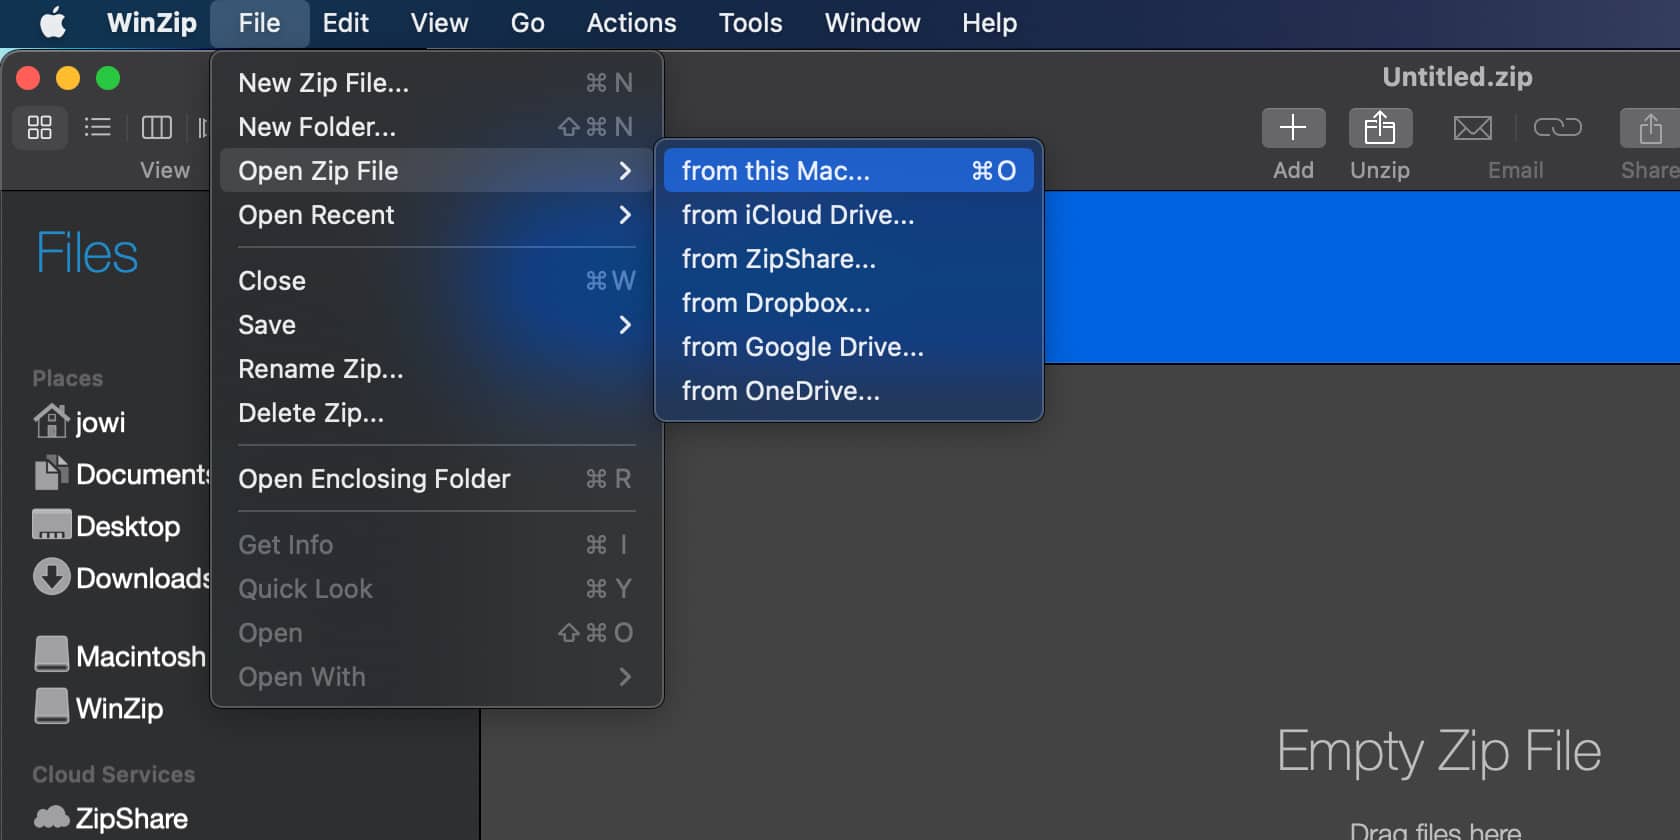 How to unzip files on a Mac - Step 2